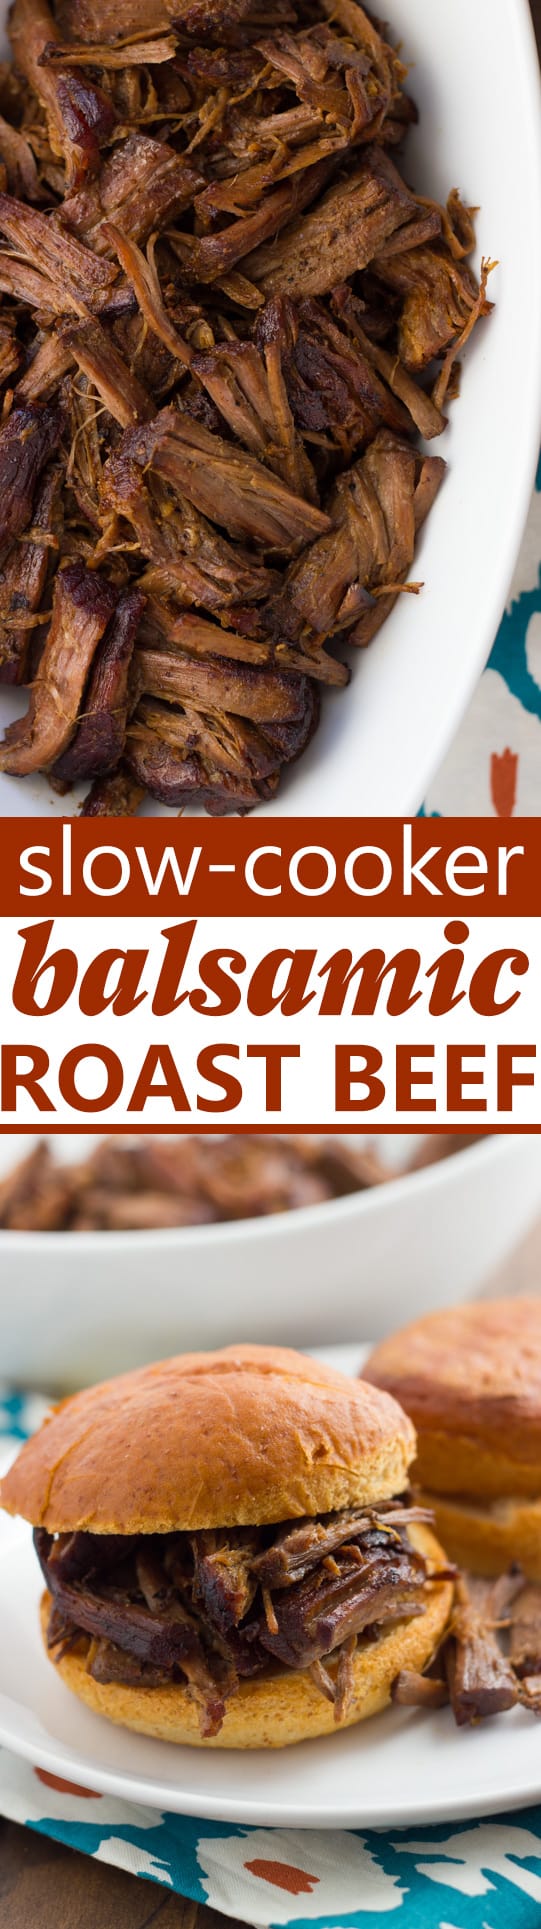 Slow-Cooker Balsamic Roast Beef! Amazingly tender, savory roast beef easily made in the slow-cooker with just 10 min prep. Delicious as pot roast or as a French-dip type sandwich! (Gluten-Free)